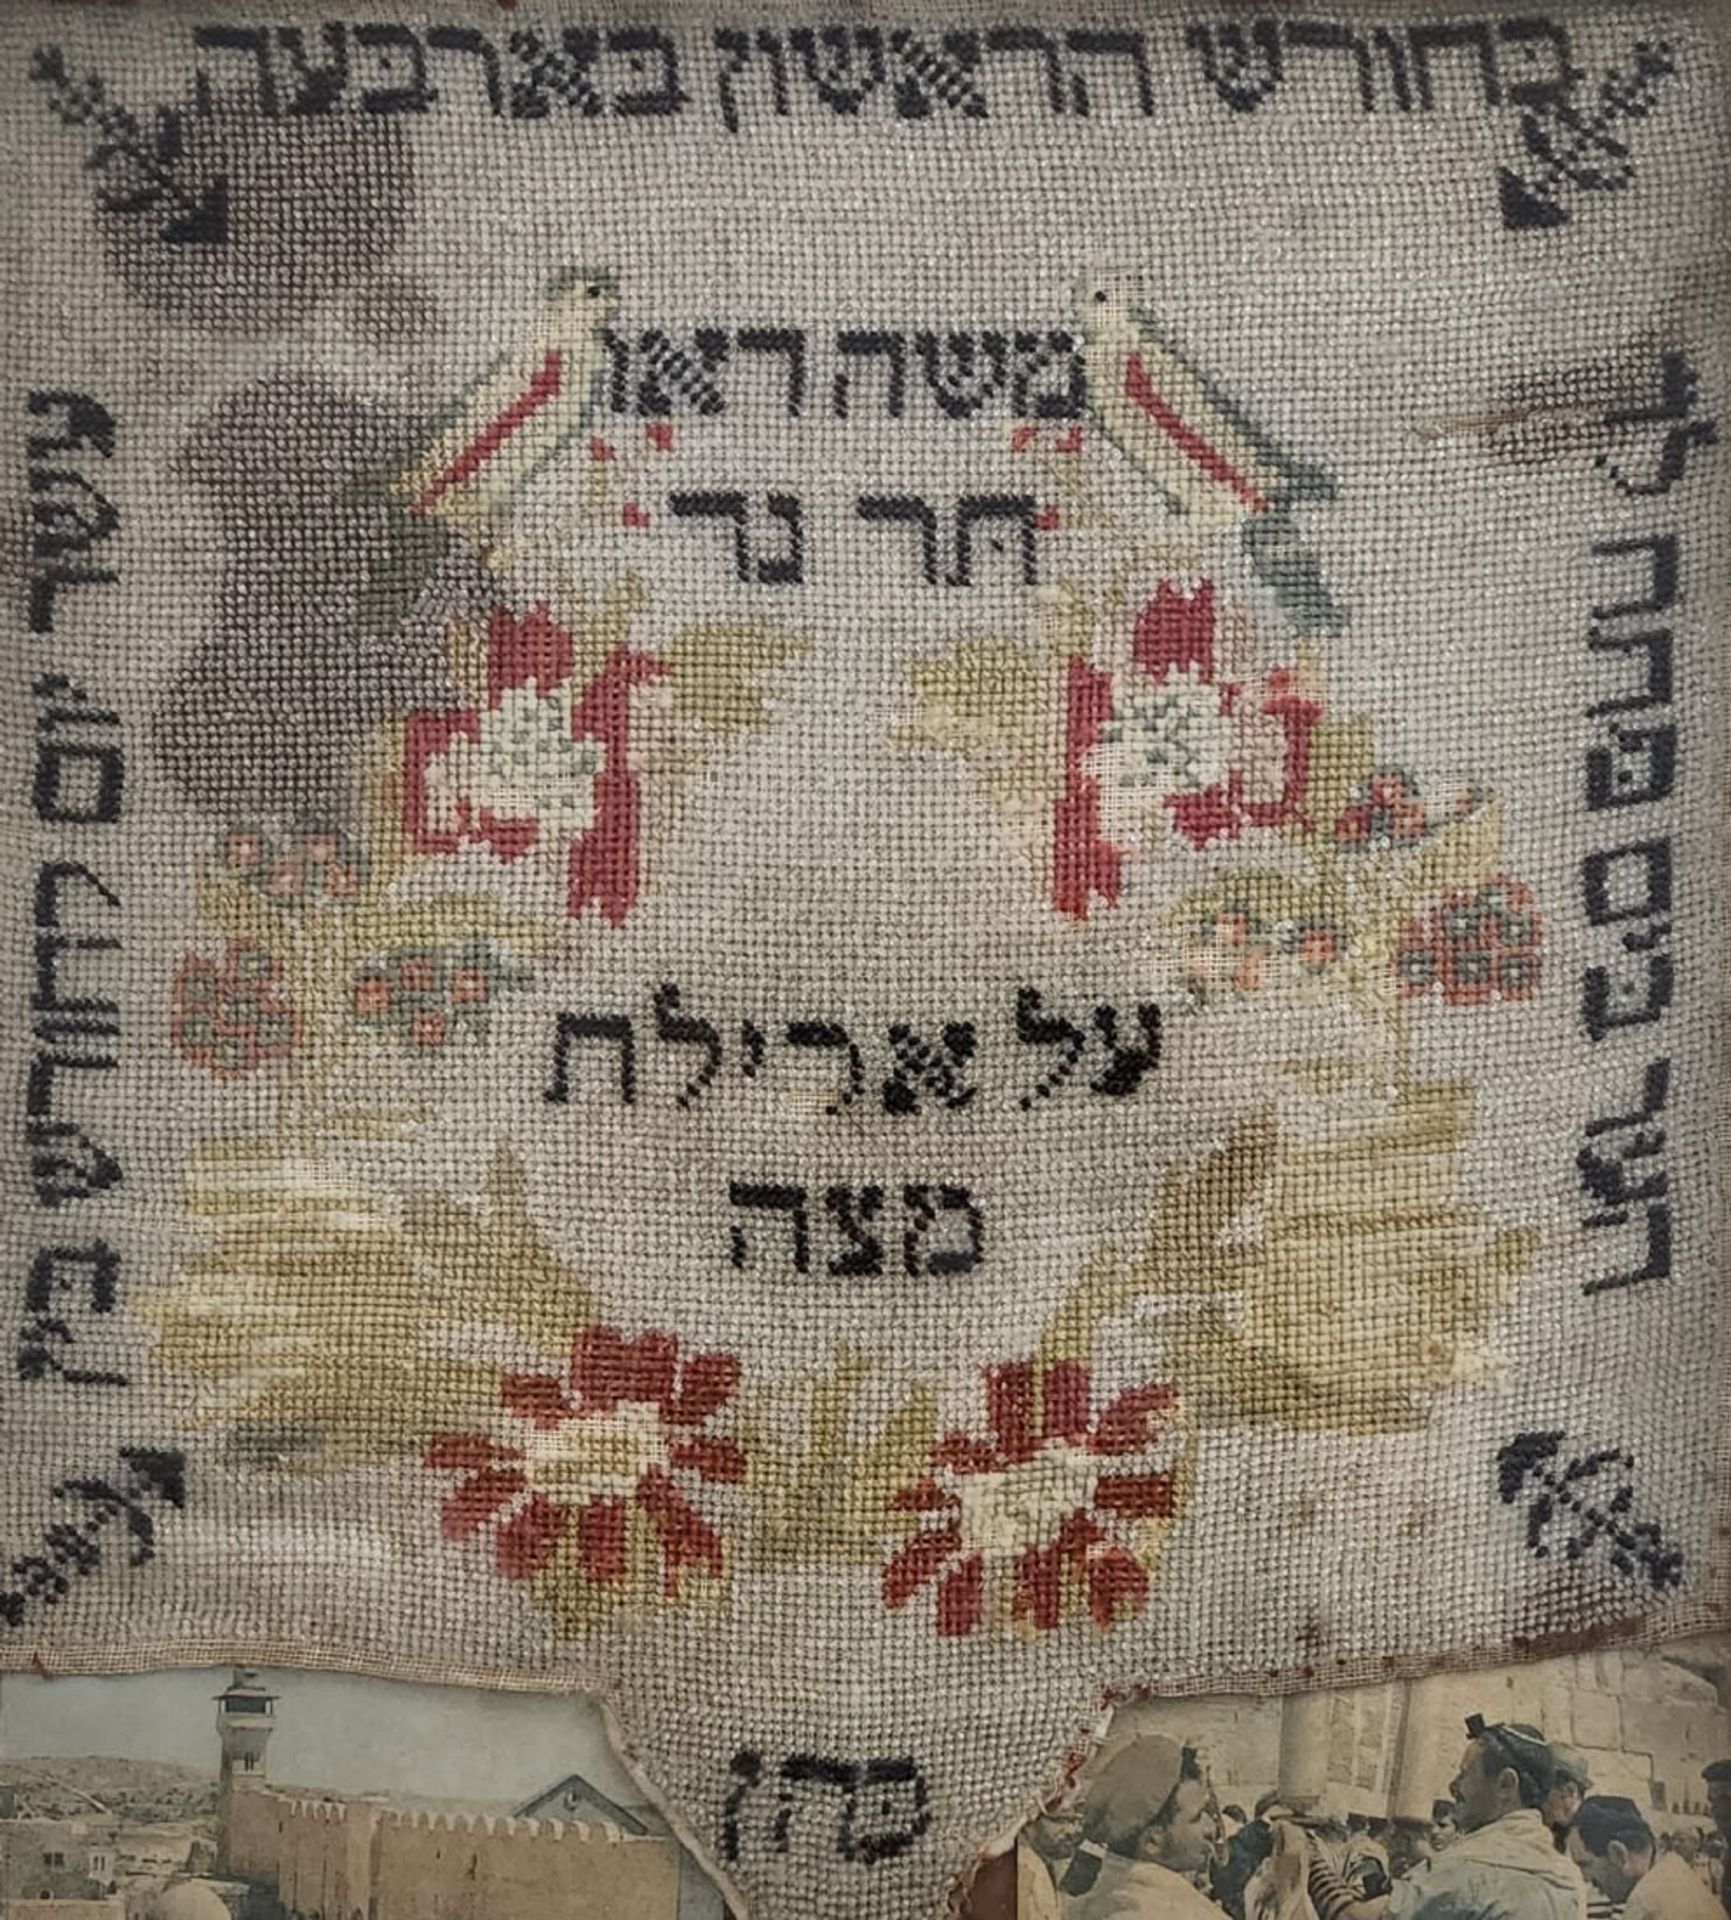 Embroidered Romanian matzoh cover for Pesach, made in 'Beads' work with glass beads from around - Image 3 of 4